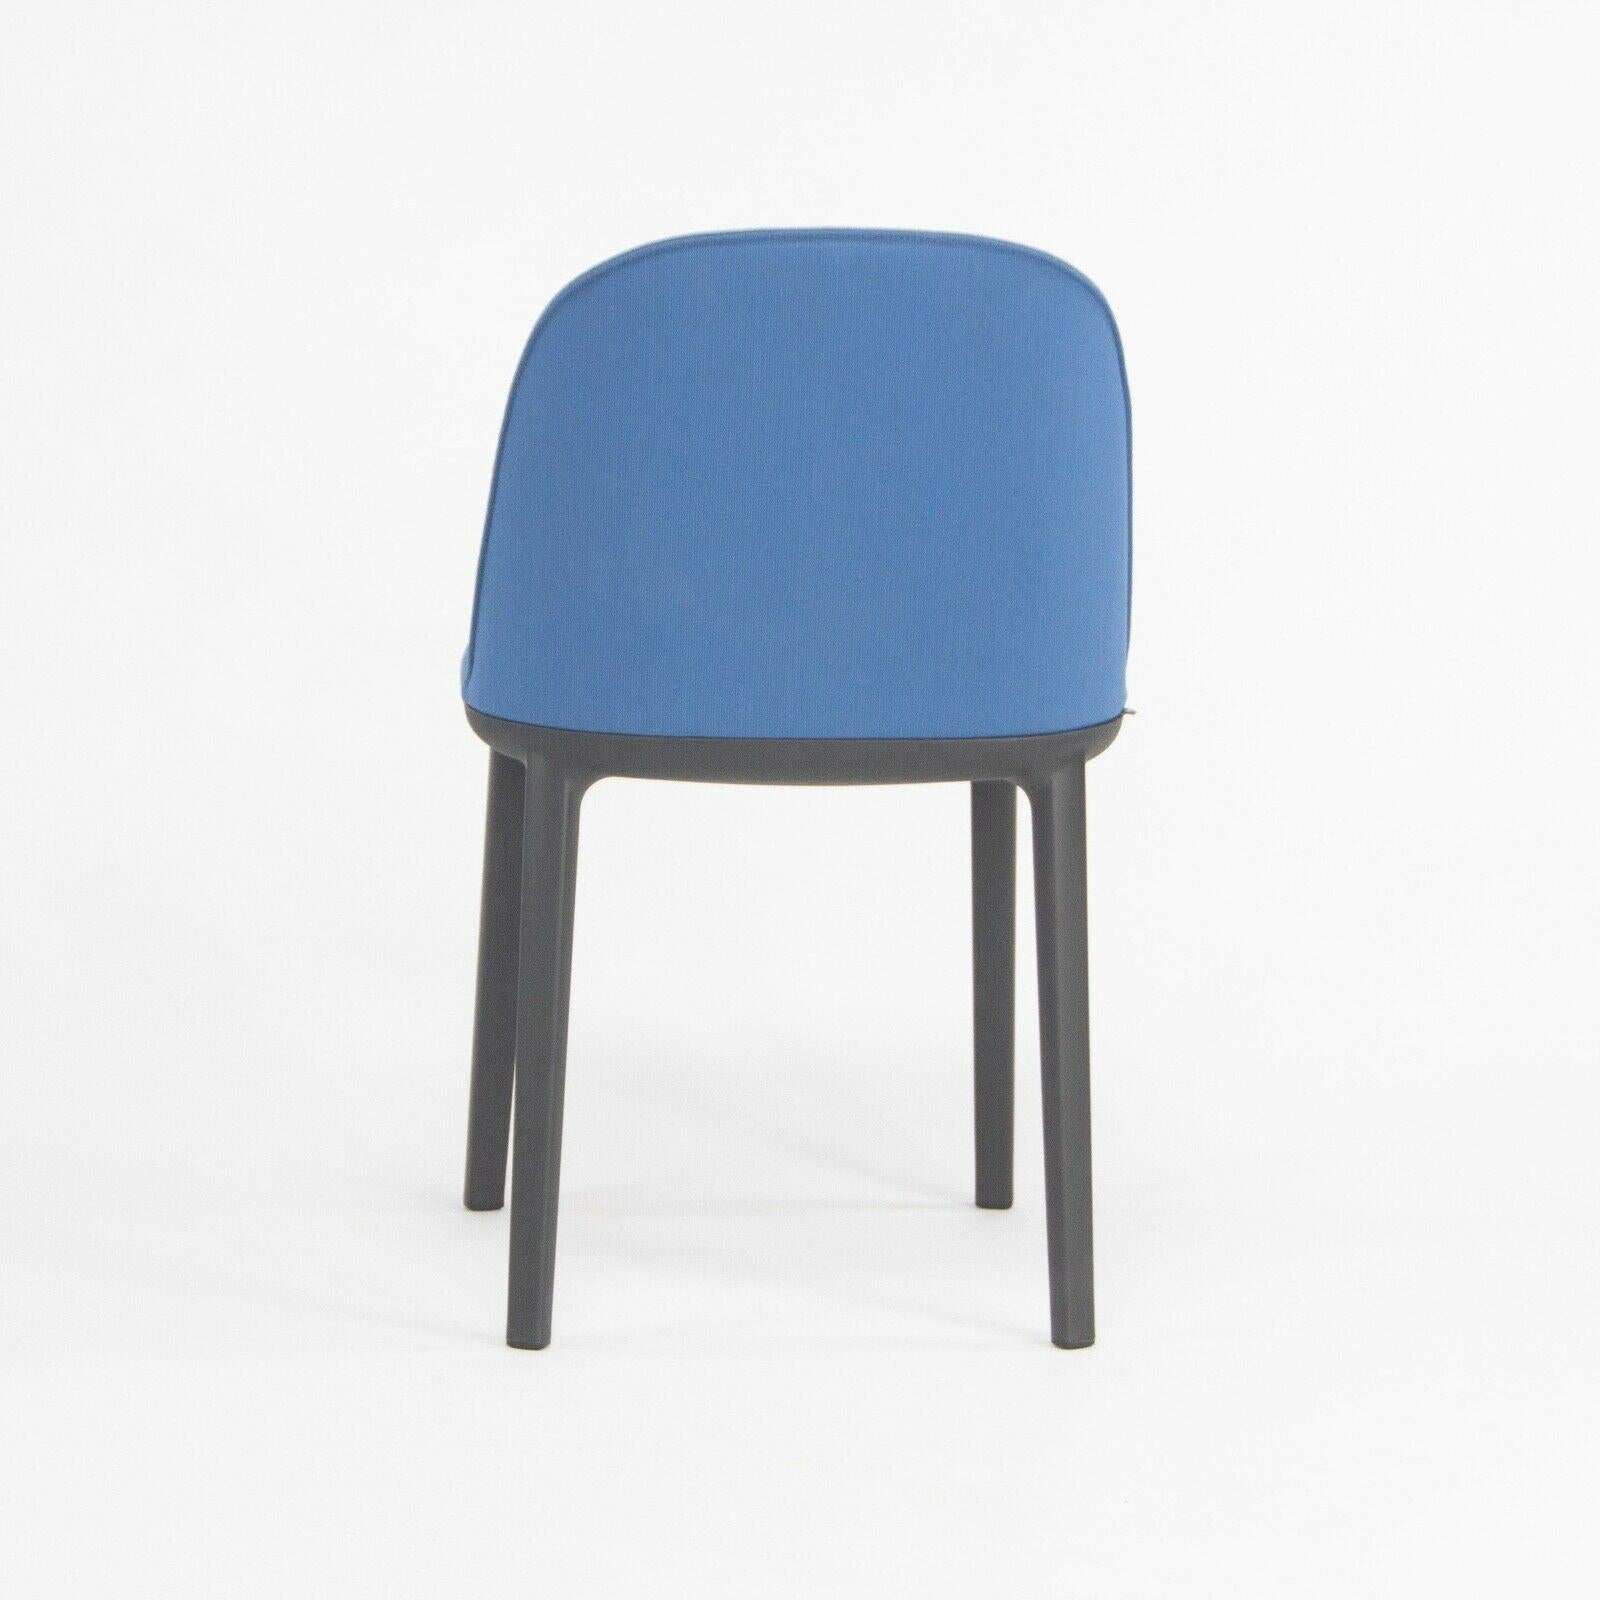 Contemporary 2019 Vitra Softshell Side Chair w/ Light Blue Fabric by Ronan & Erwan Bouroullec For Sale